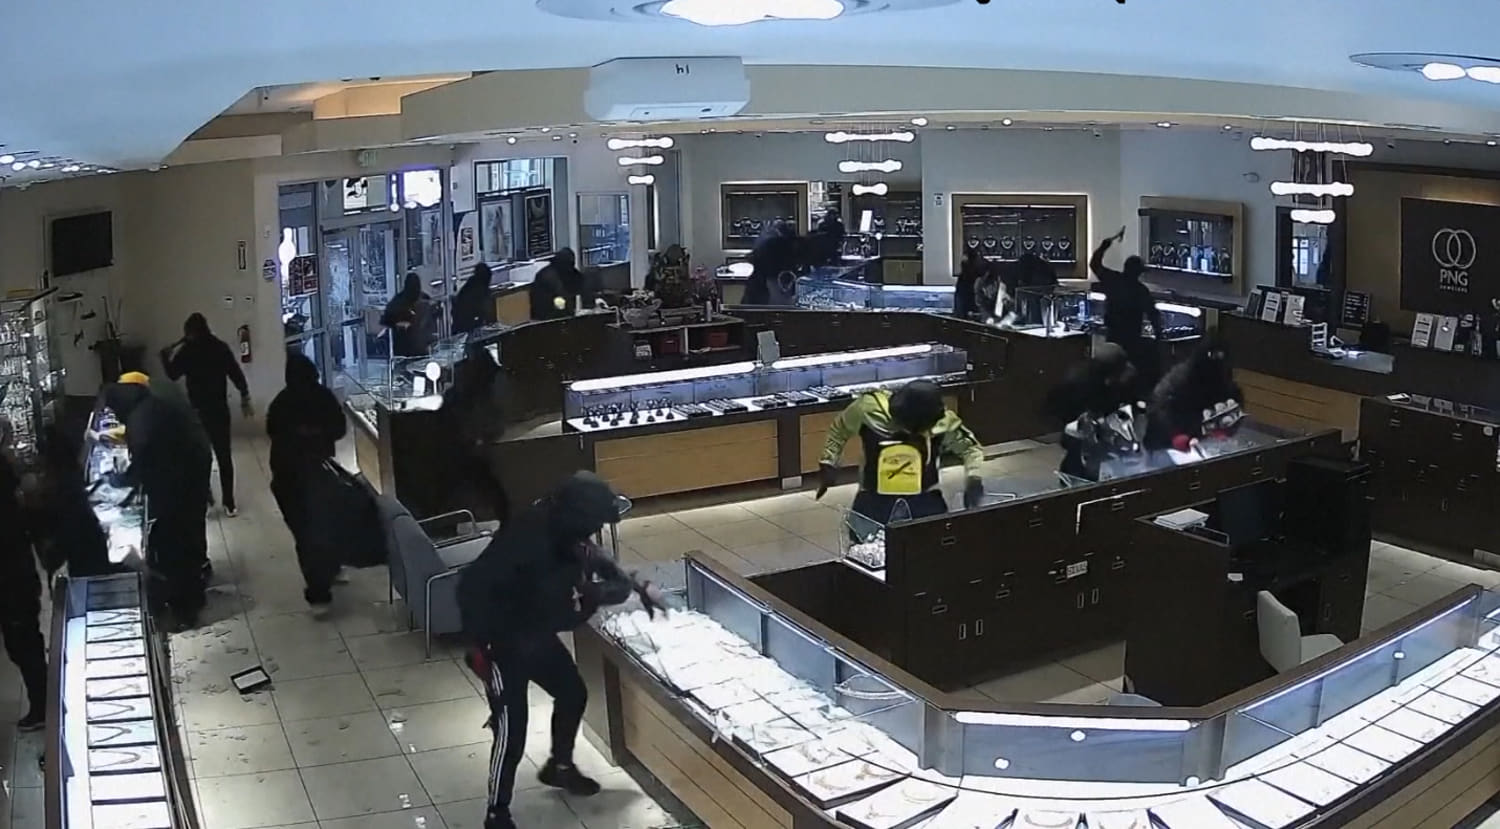 5 arrested in robbery of Sunnyvale jewelry store